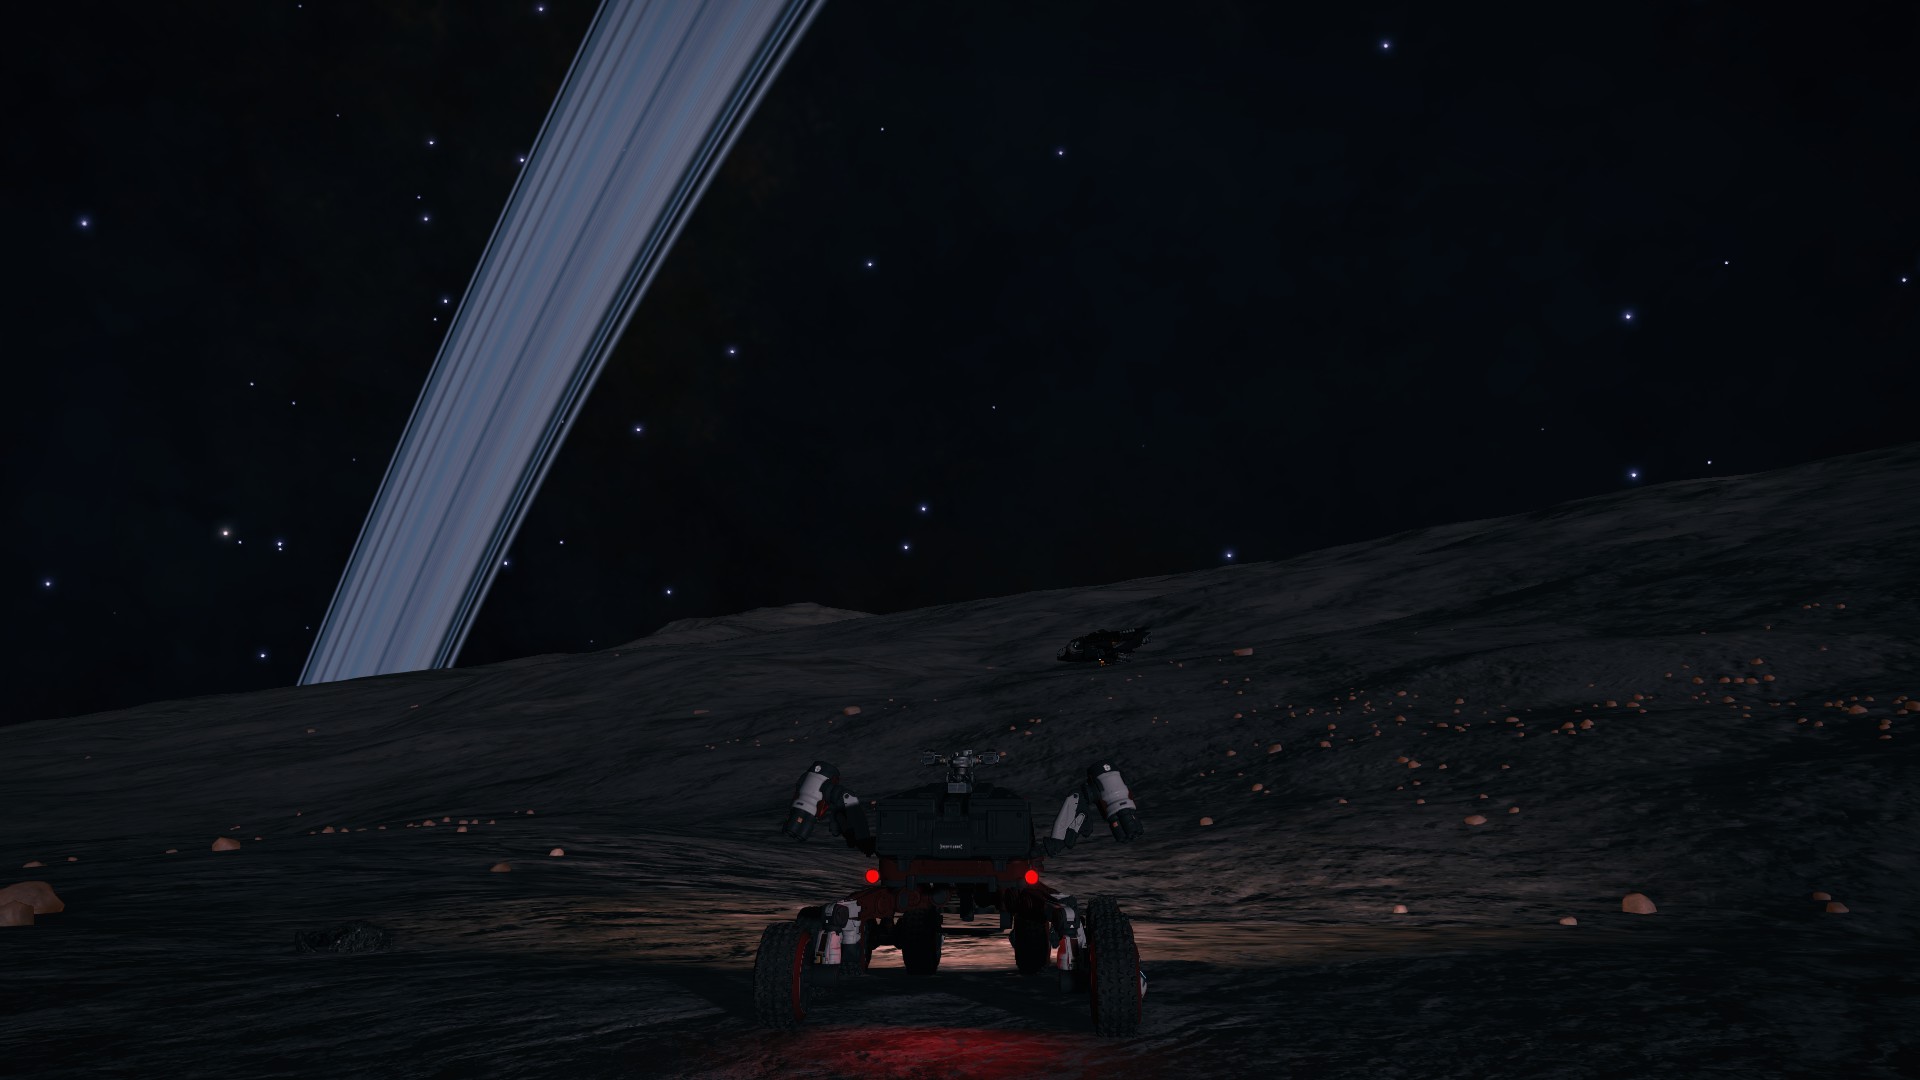 Rings of a planet viewed from the surface